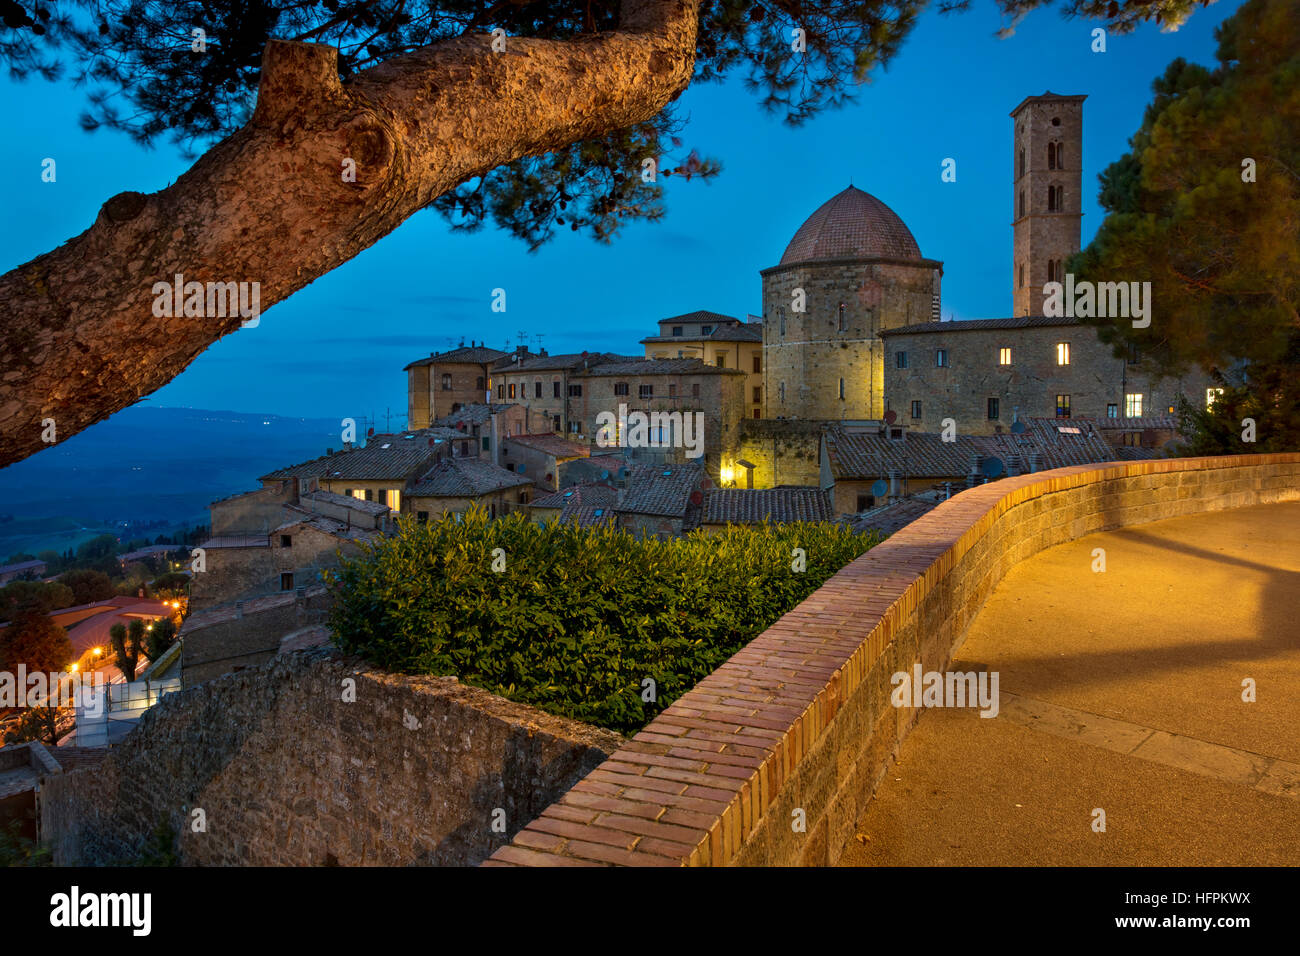 Twilight over the Cathedral of Santa Maria Assunta and the medieval town of Volterra, Tuscany, Italy Stock Photo